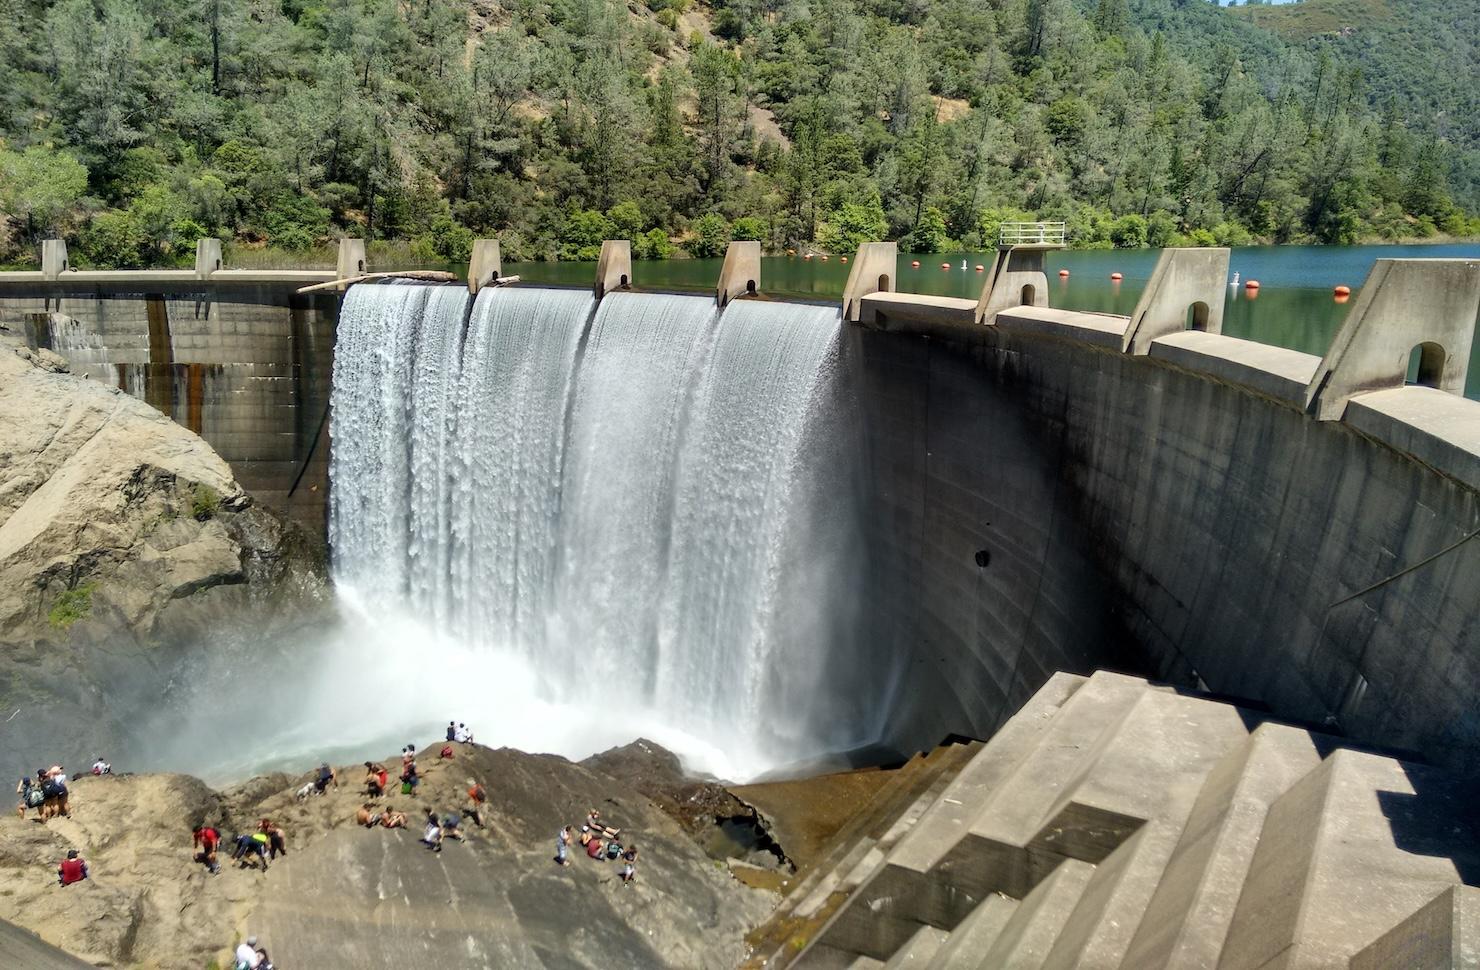 An image of a dam with water spilling over it